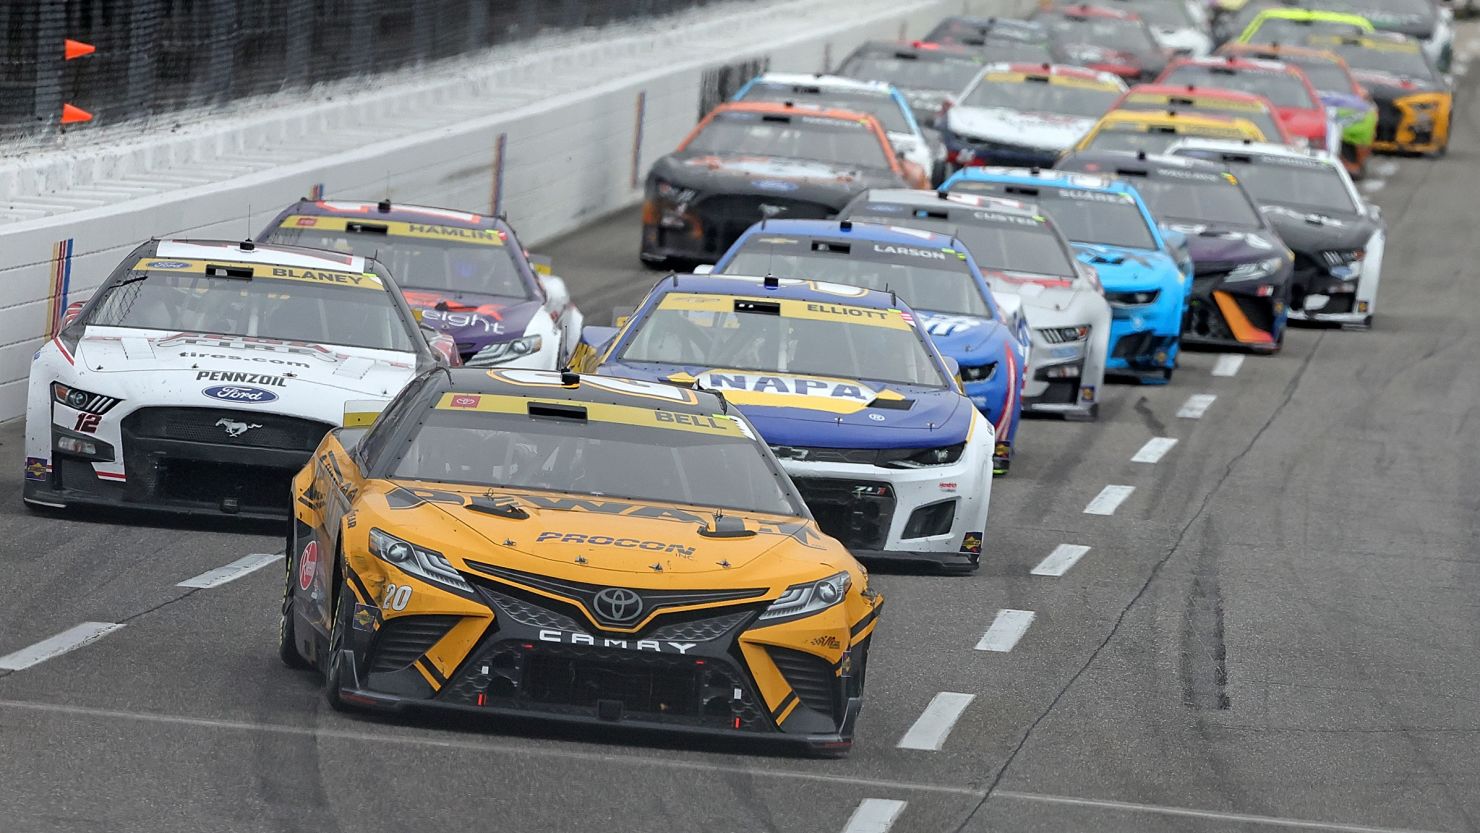 How to Watch Auto Racing Streaming Live Today - November 16